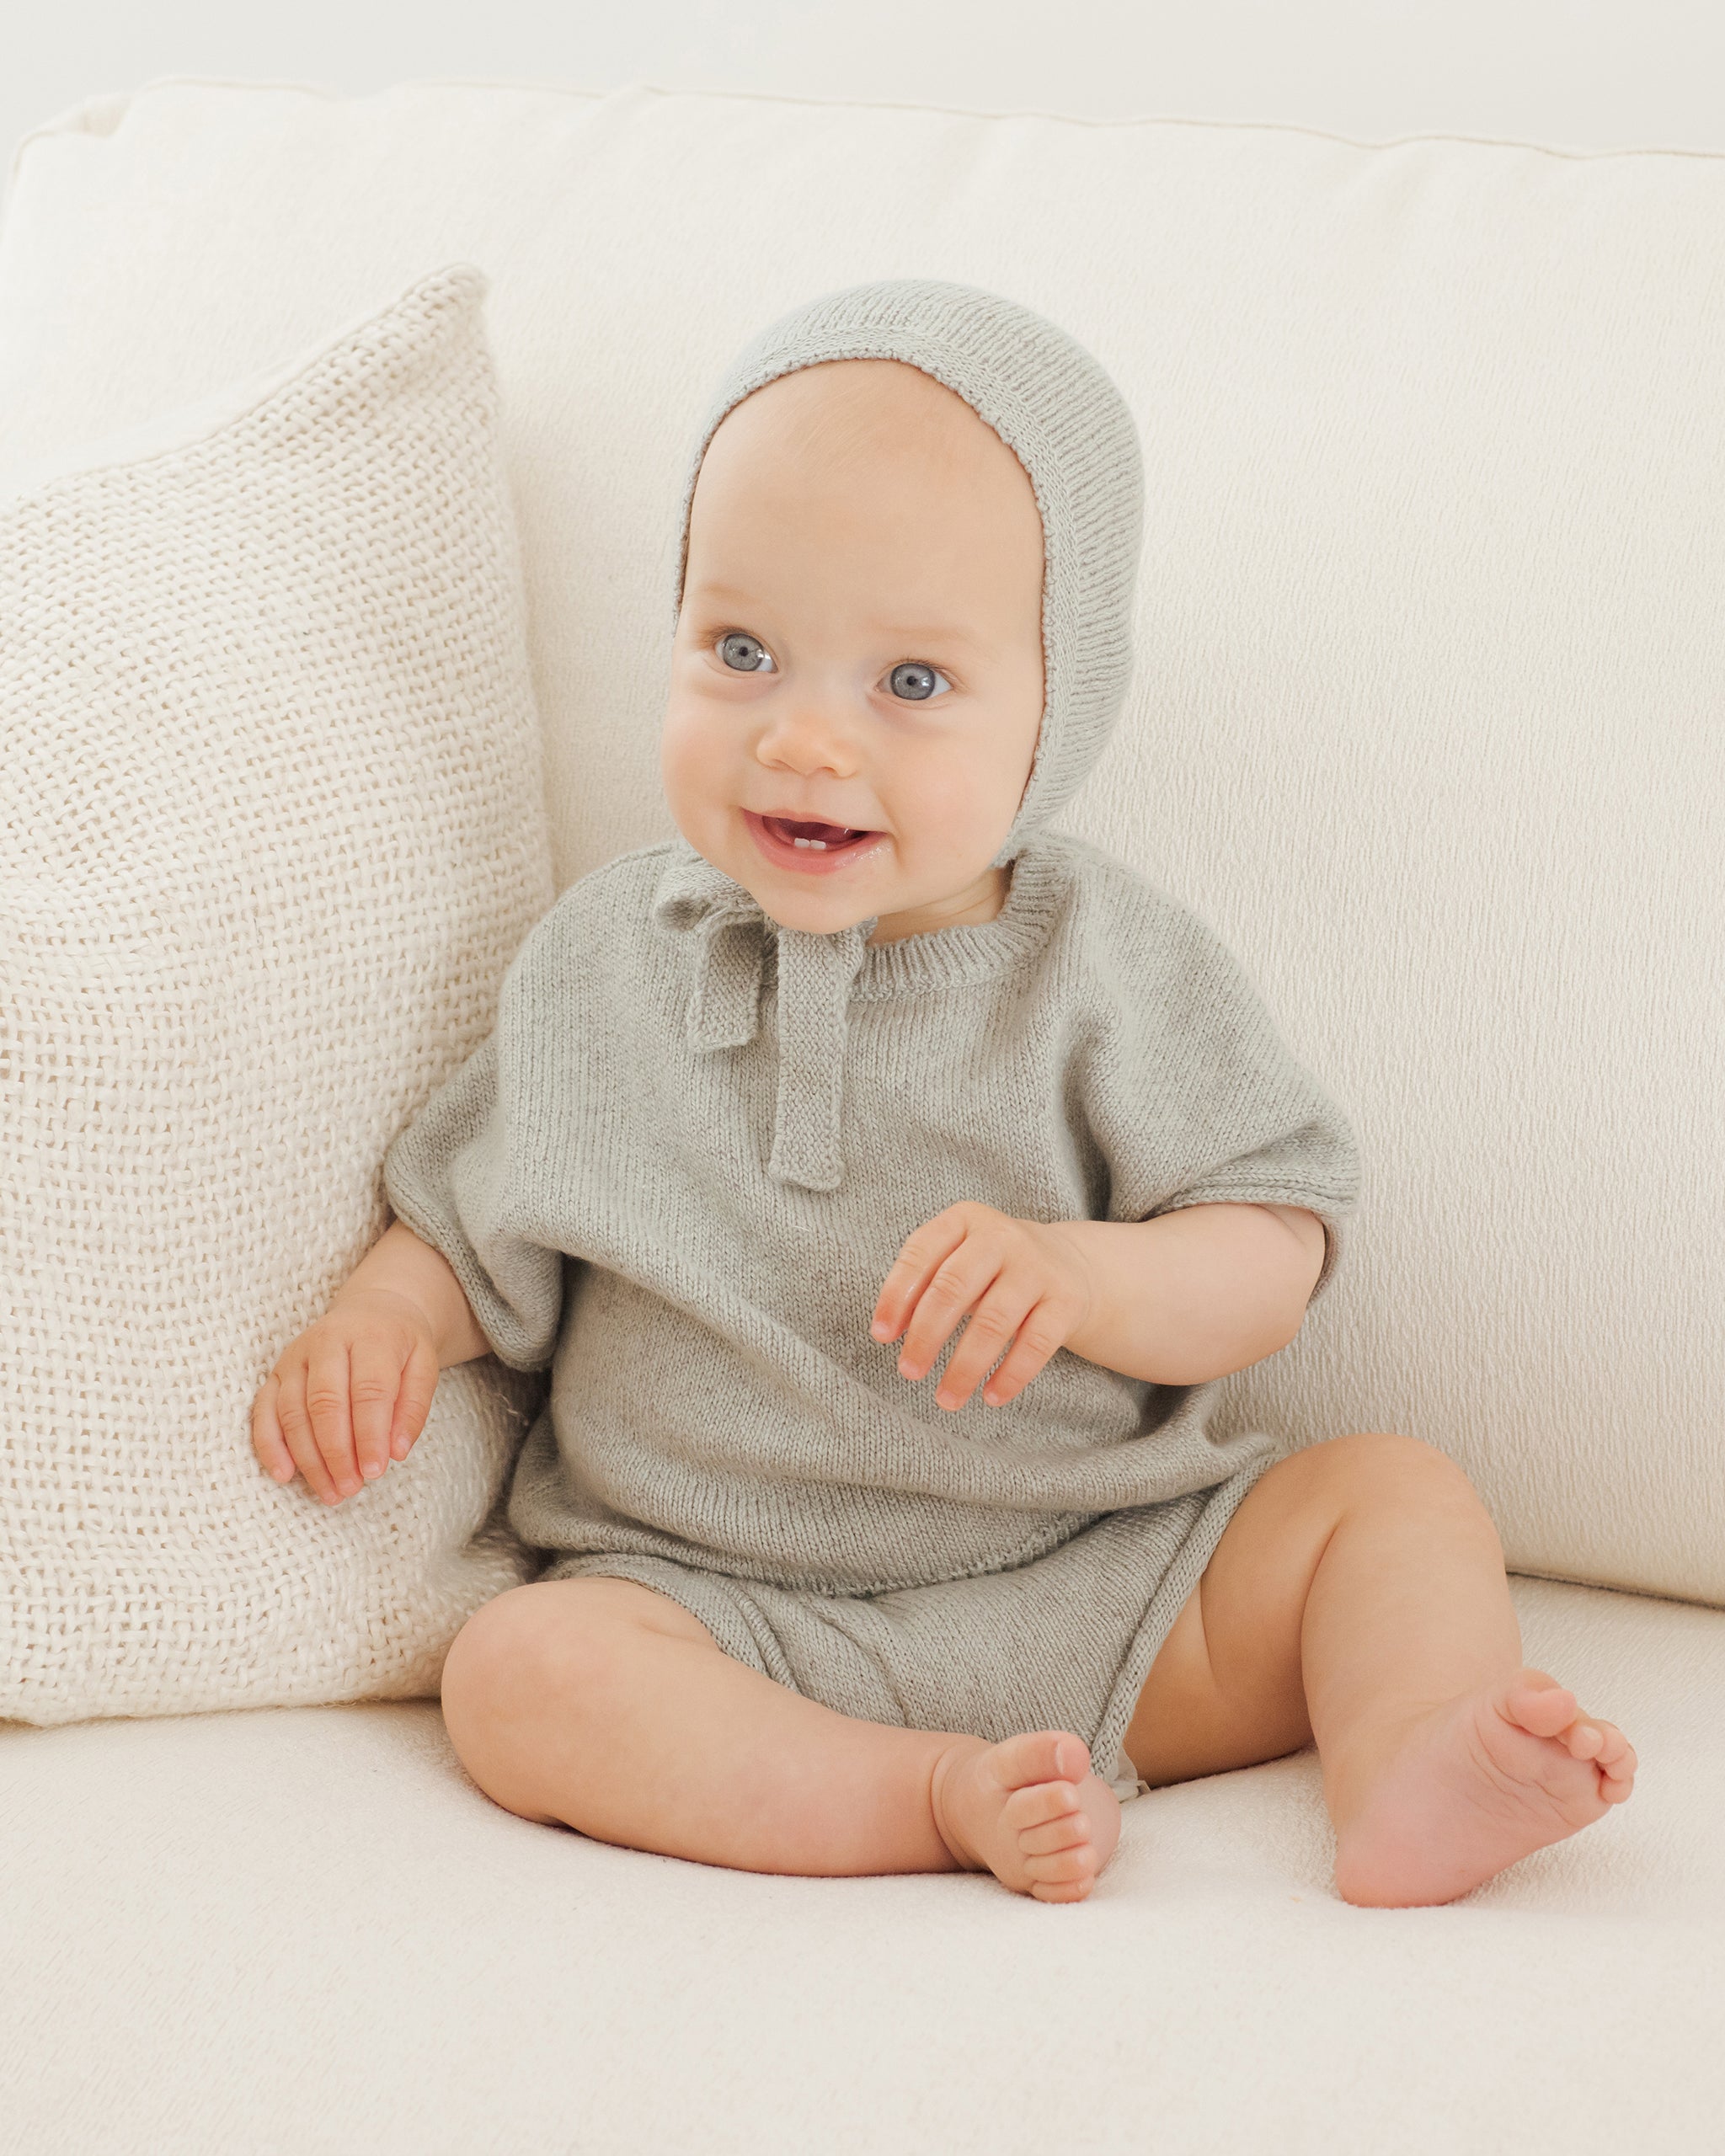 Relaxed Summer Knit Set || Heathered Sky - Rylee + Cru | Kids Clothes | Trendy Baby Clothes | Modern Infant Outfits |